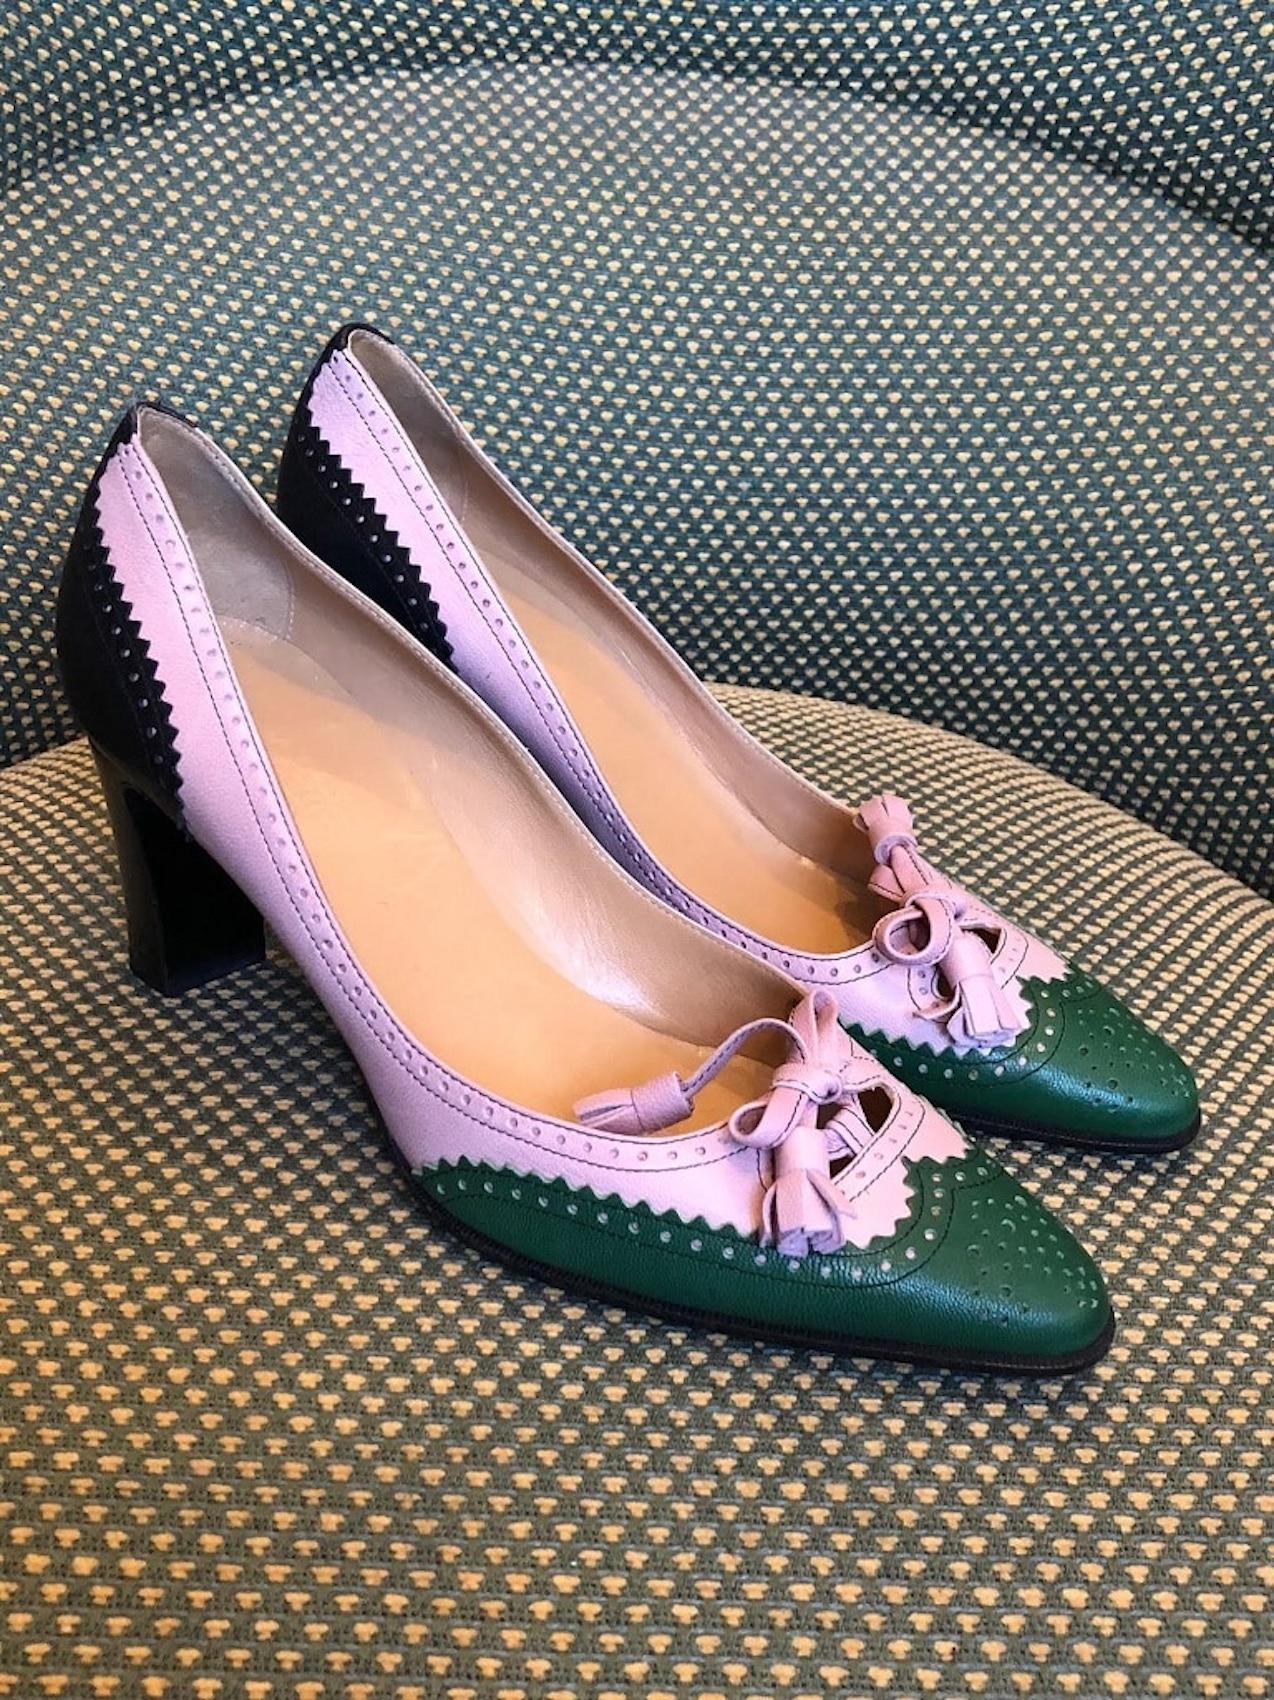 HERMÈS Heels Pumps Brogue Shoes Tricolour Vintage
A stunning and a very rare HERMÈS 80s-90s brogue pumps shoes, handcrafted in perforated tricolour leather, light pink, green and black colour. Light pink tie front tassel detail. A chunky wooden